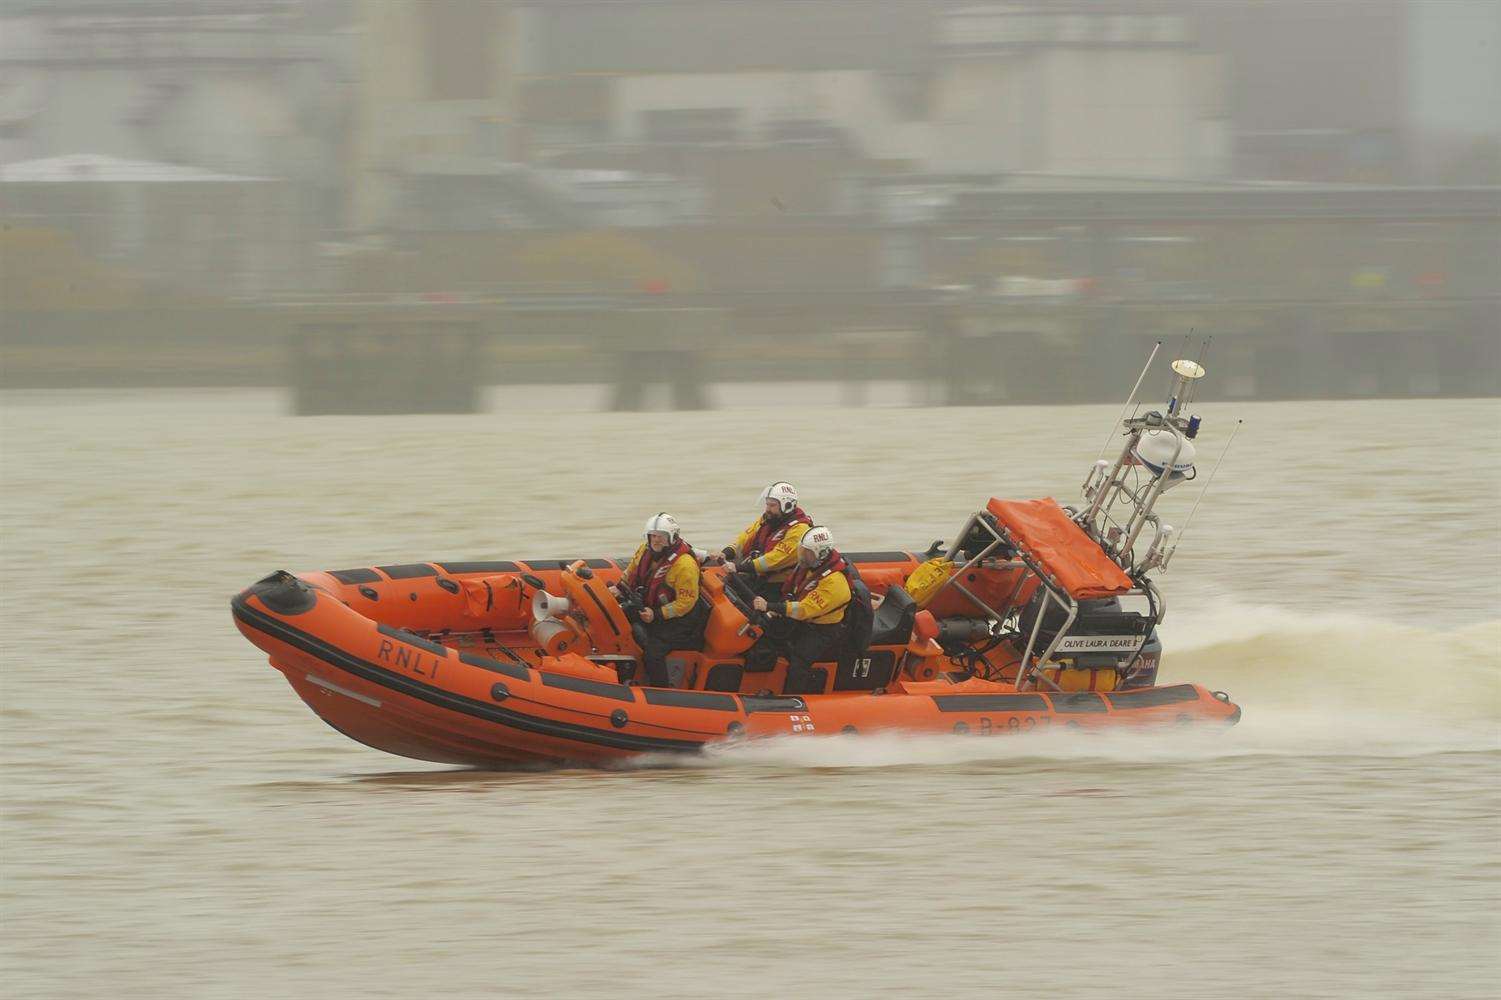 Gravesend RNLI helped with the rescue